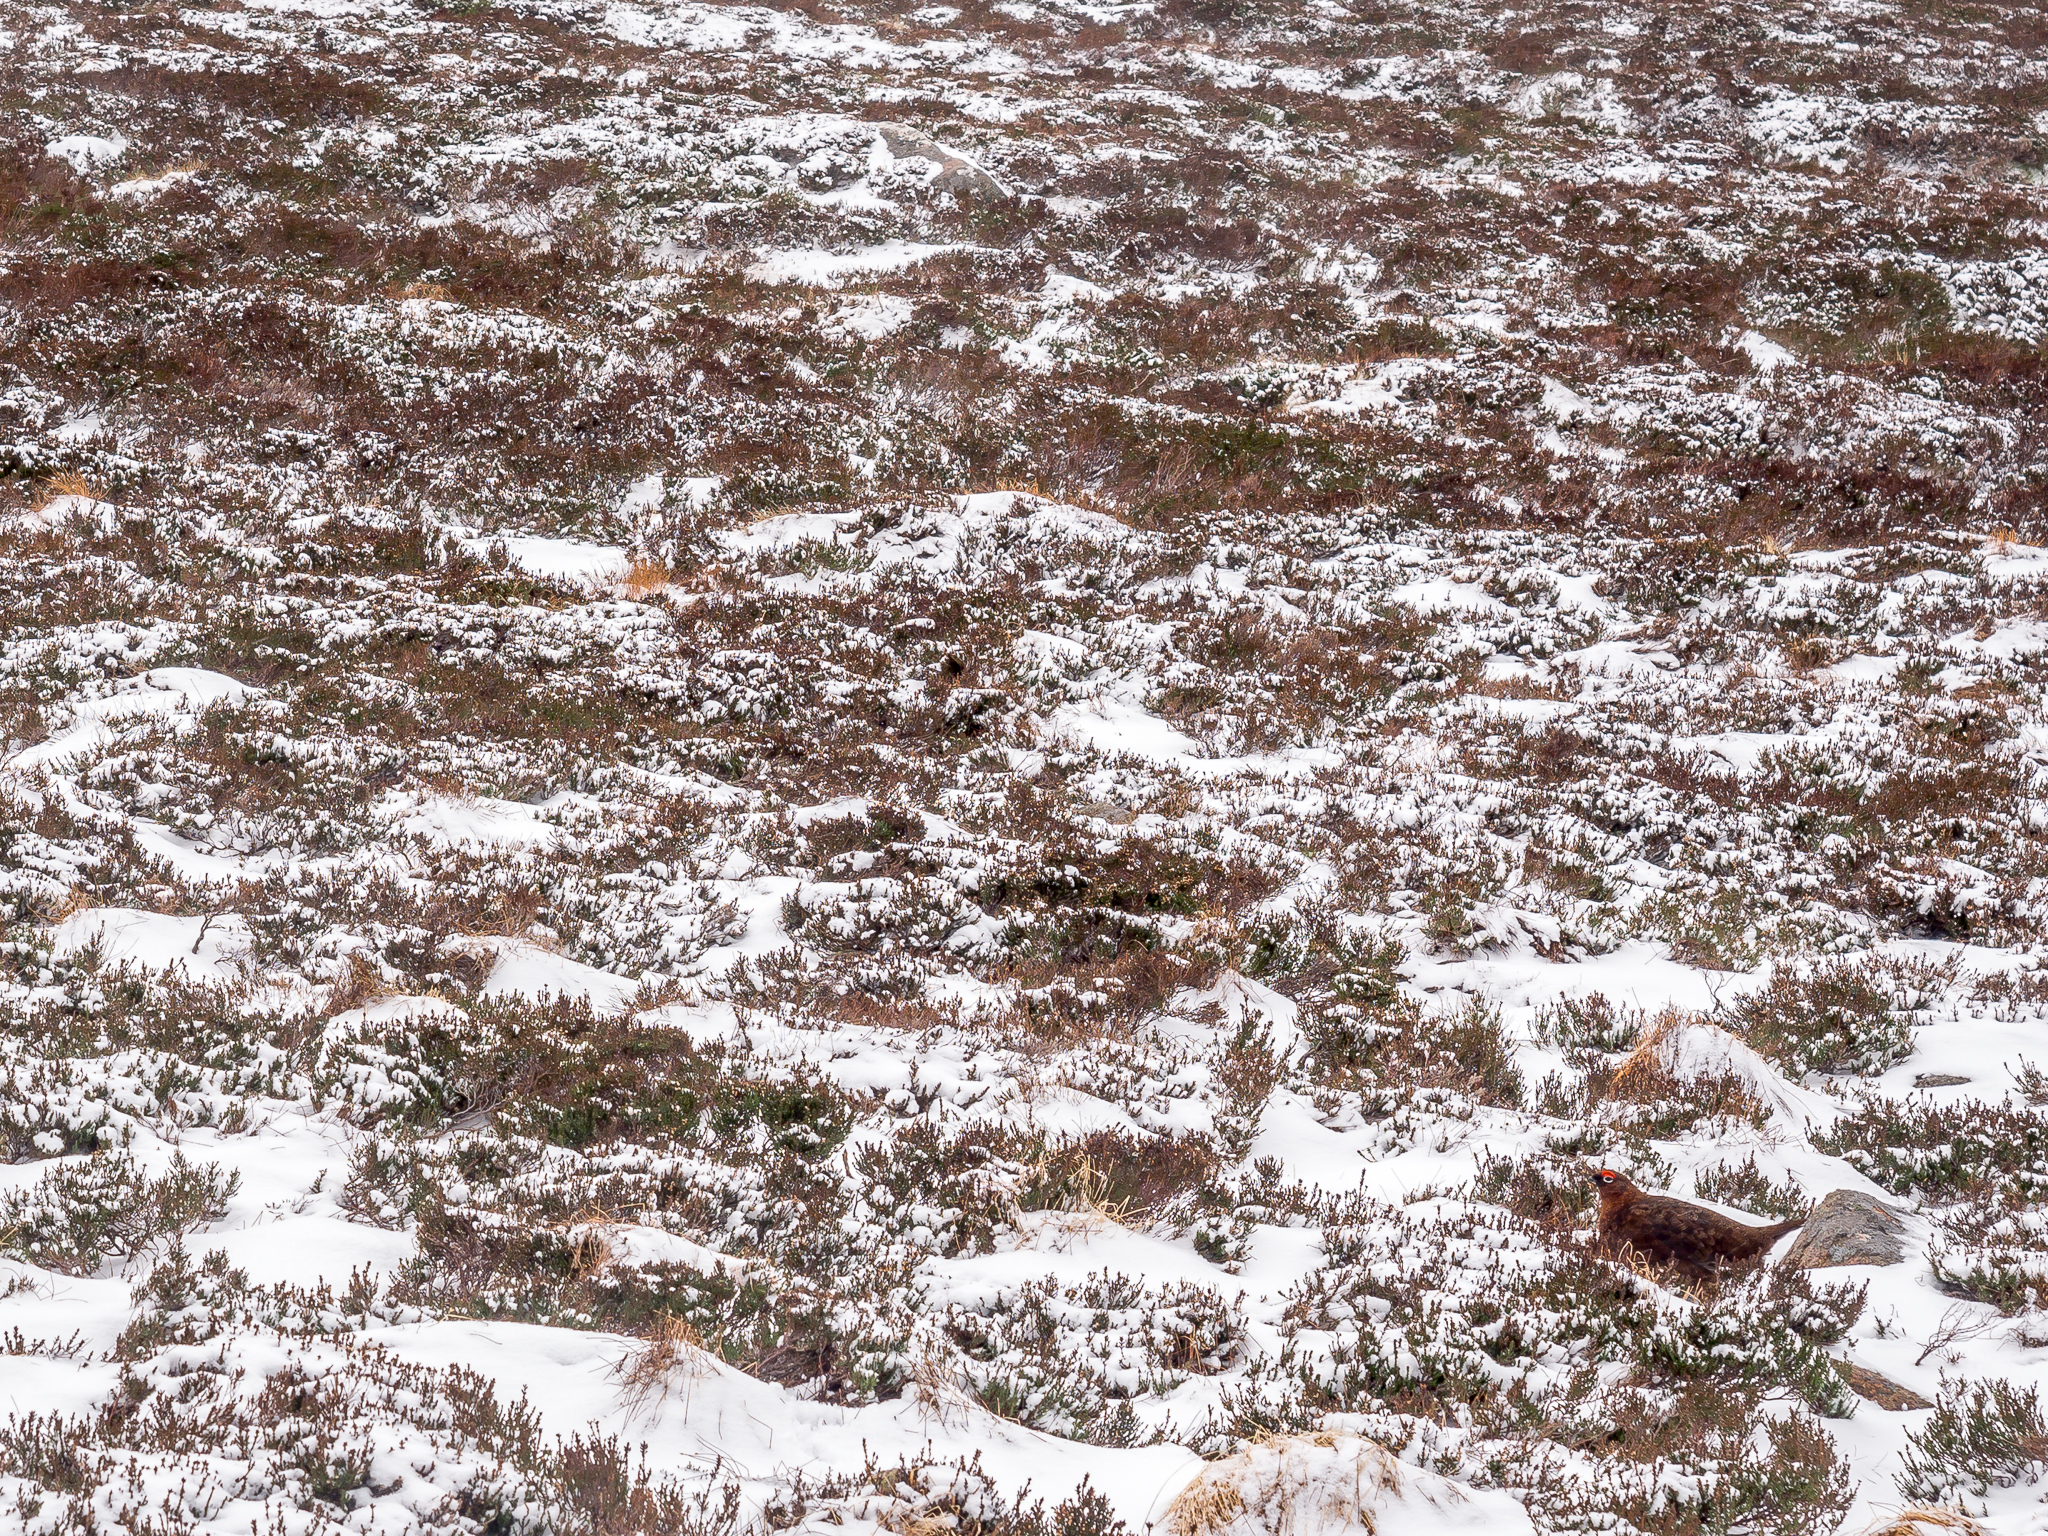 A Grouse in the Heather